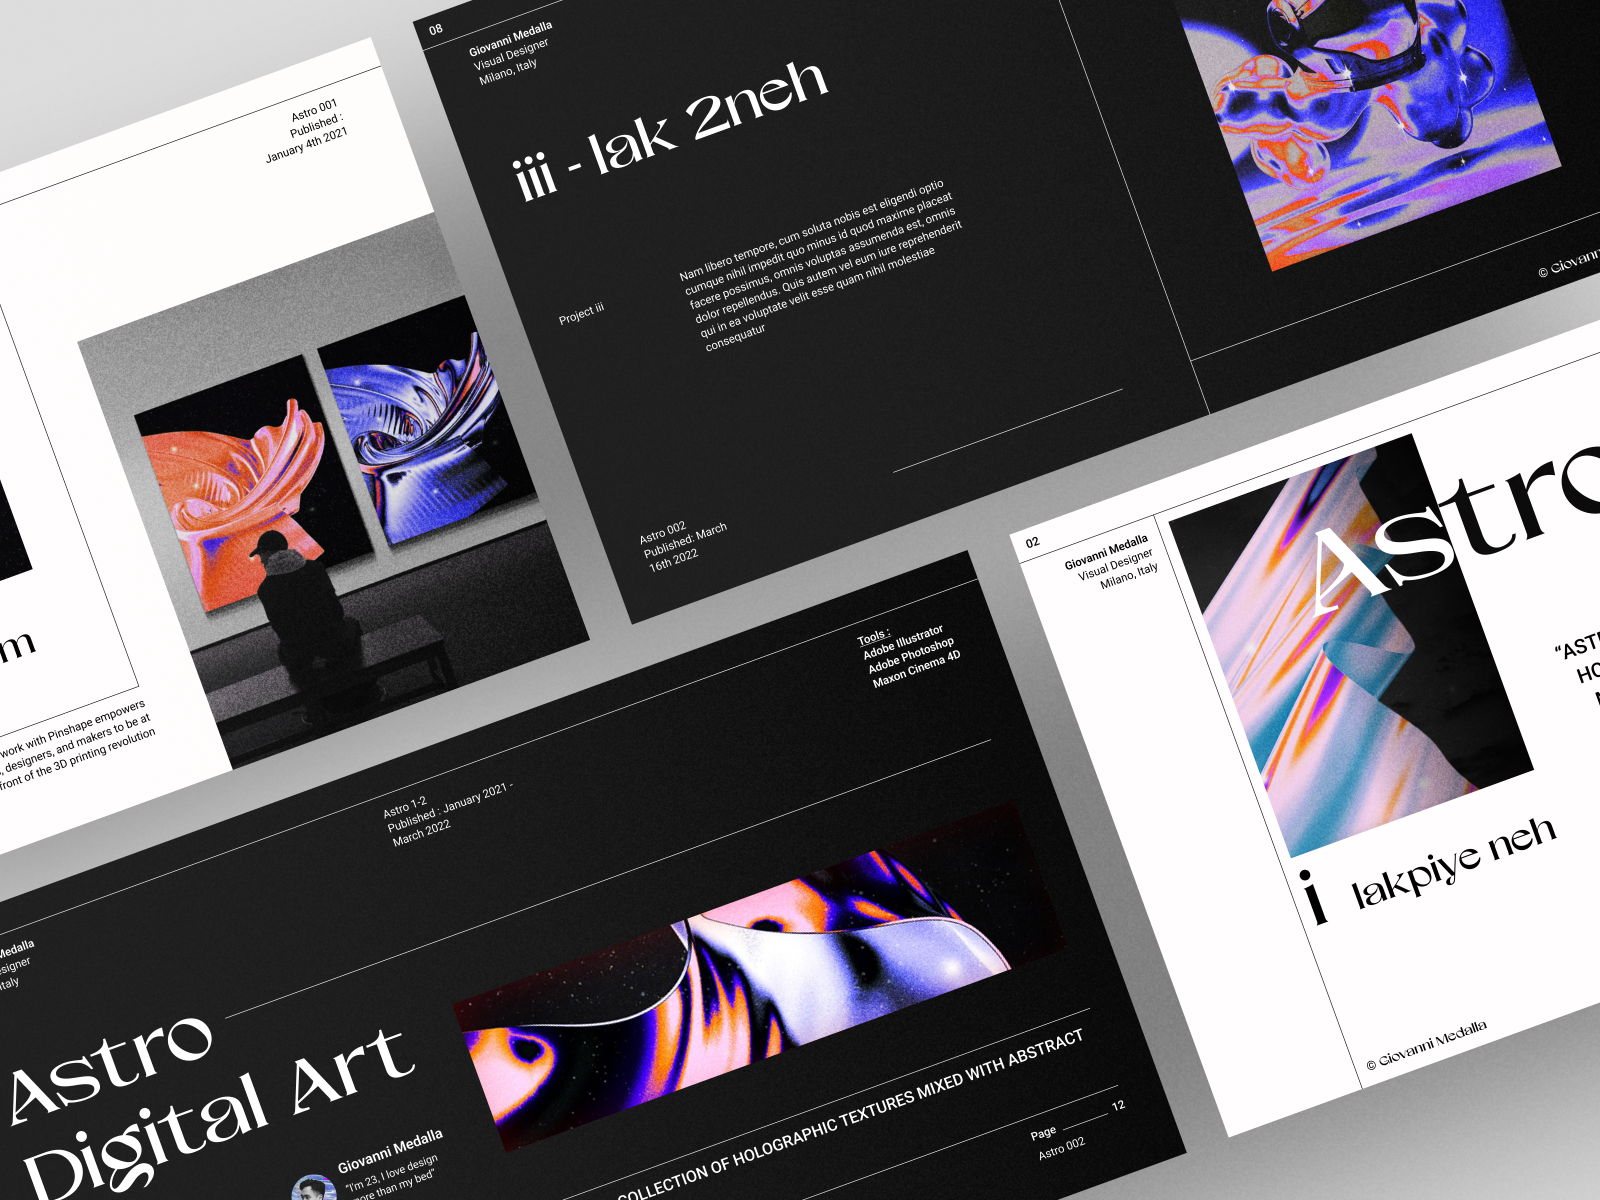 ASTRO - Art Pitch Deck by Agum Satria for Plainthing Studio on Dribbble